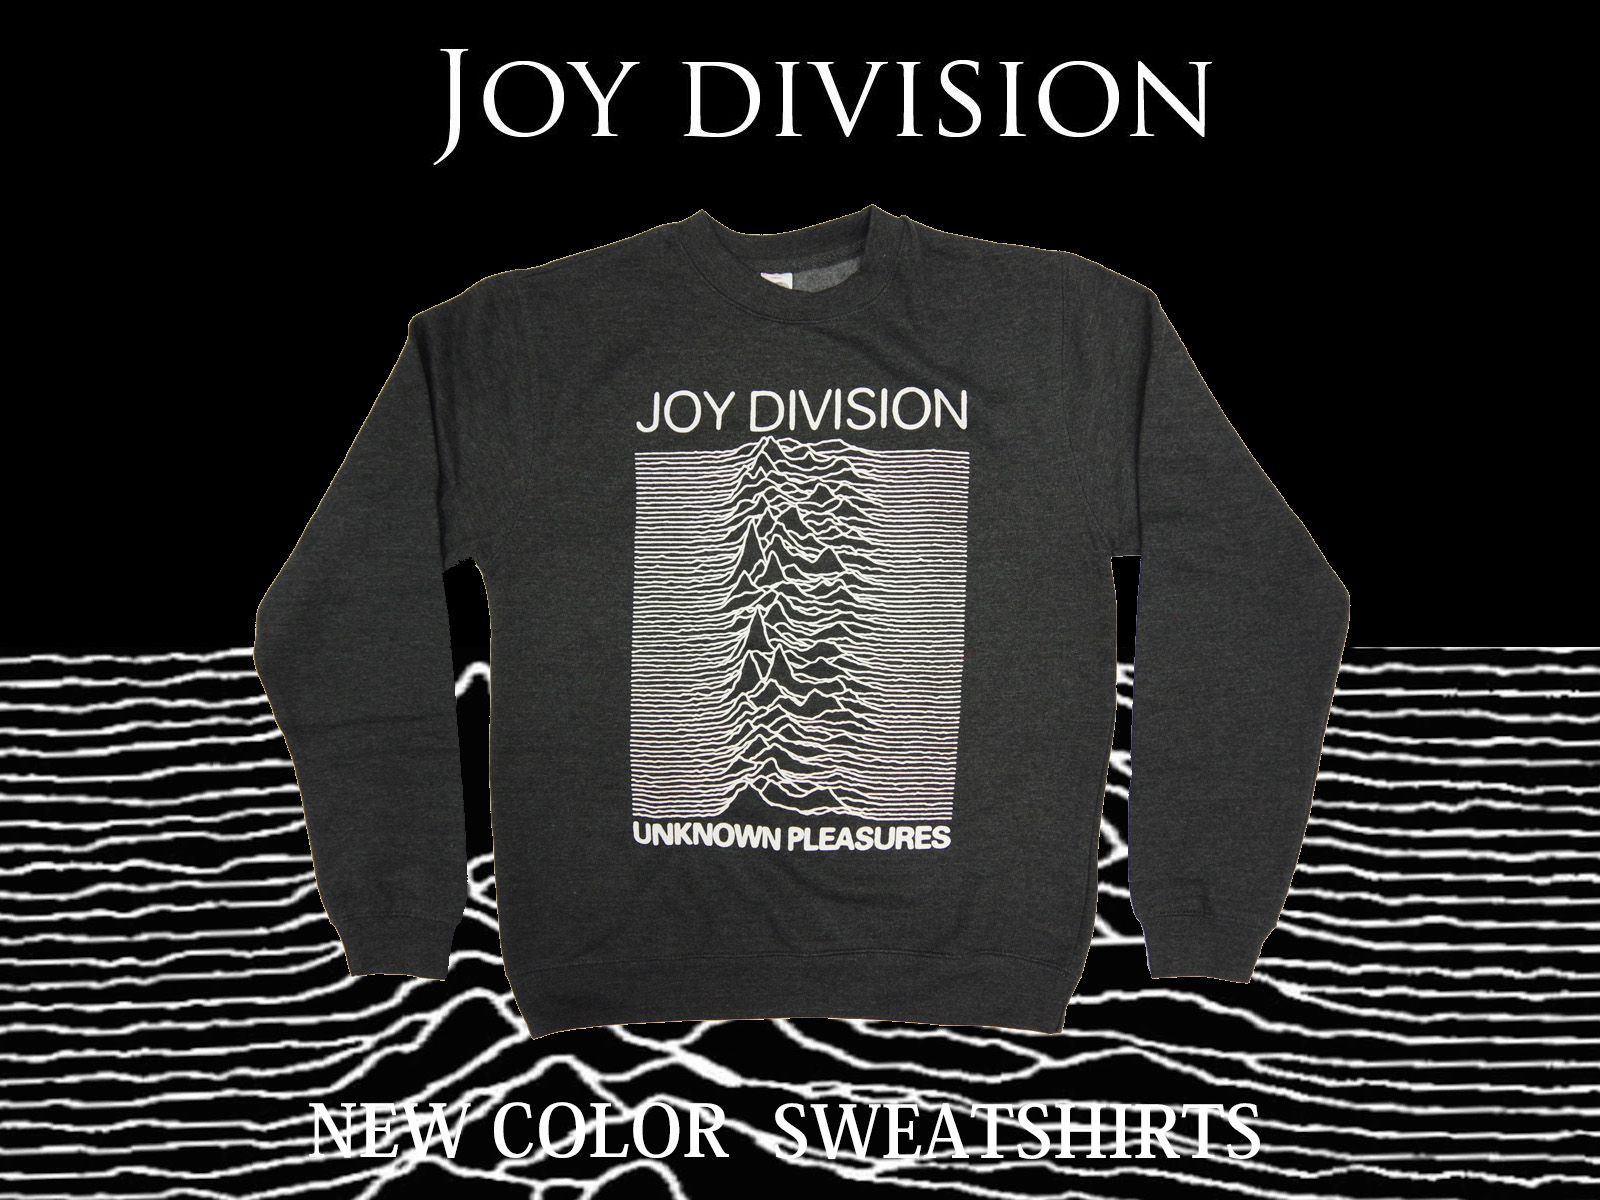 JOY DIVISION – New Official Item